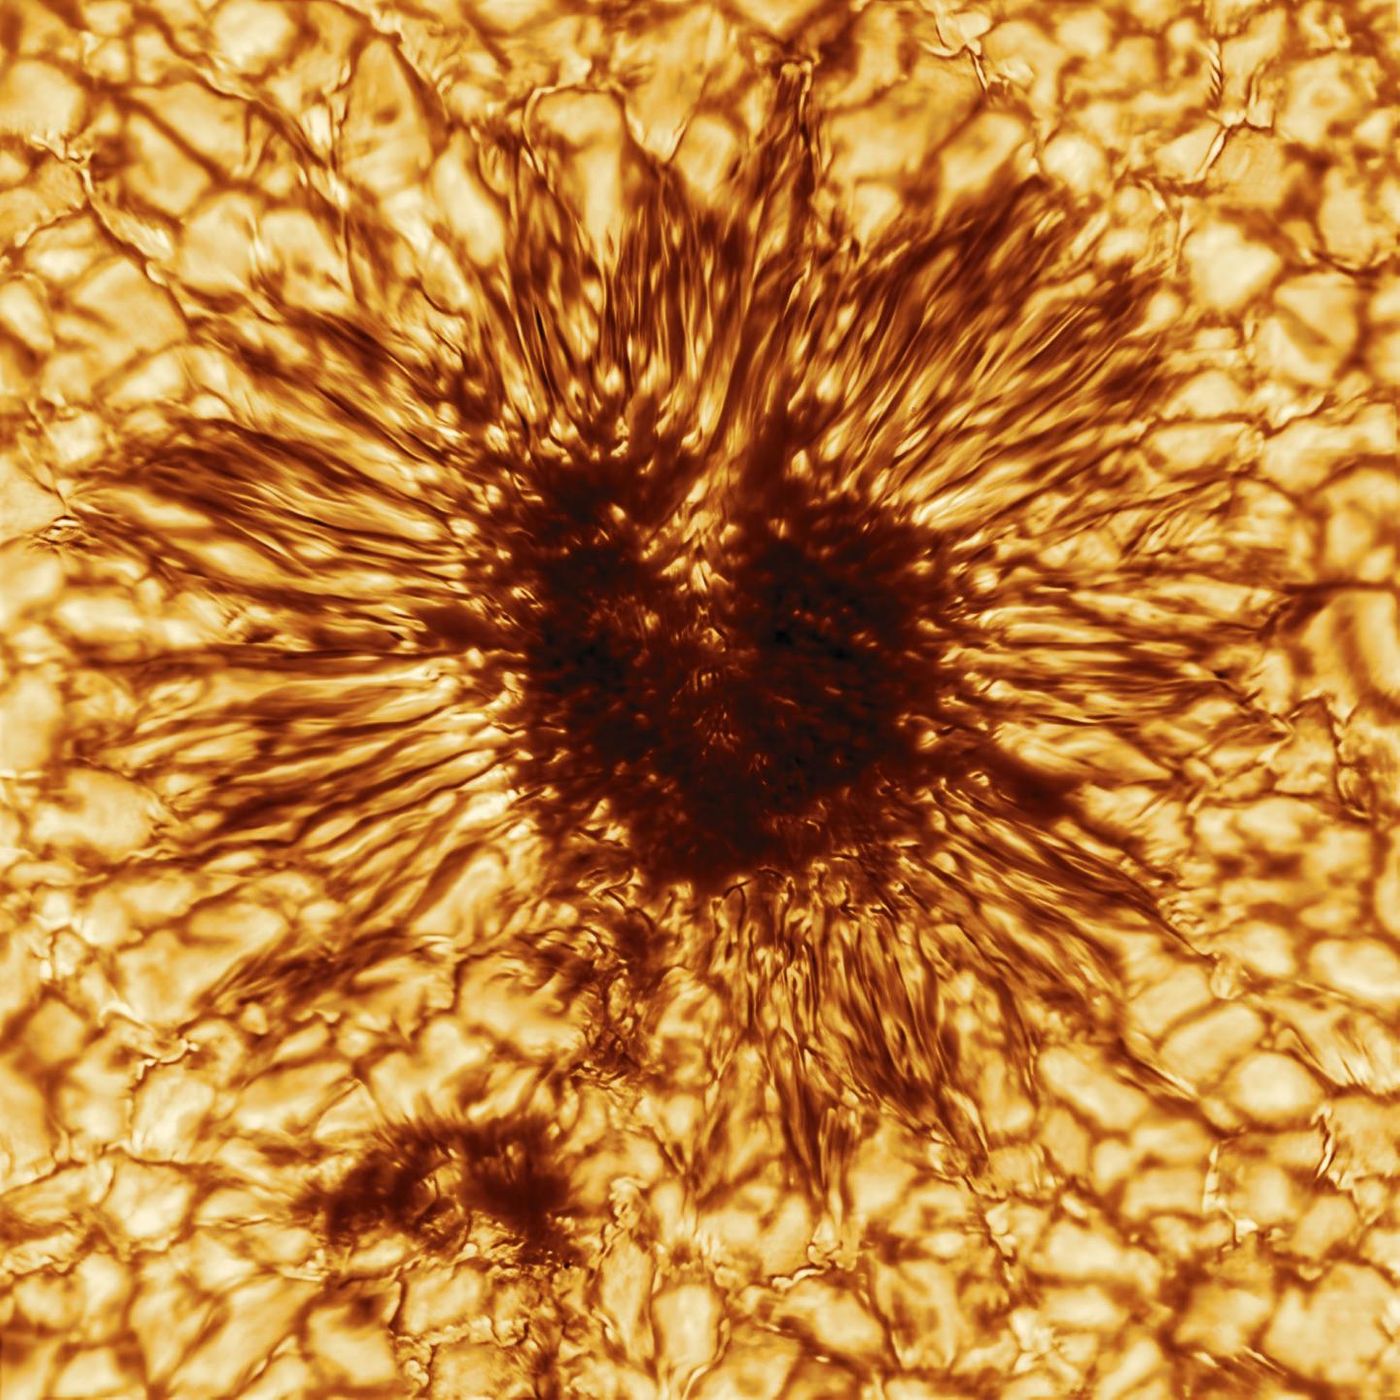 This is the first sunspot image taken on Jan. 28, 2020, by the NSF's Inouye Solar Telescope's Wave Front Correction context viewer. The image reveals striking details of the sunspot's structure as seen at the sun's surface. The sunspot is sculpted by a convergence of intense magnetic fields and hot gas boiling up from below. This image uses a warm palette of red and orange, but the context viewer took this sunspot image at the wavelength of 530 nanometers -- in the greenish-yellow part of the visible spectrum. This is not the same naked eye sunspot group visible on the sun in late November and early December 2020. Credit  NSO/AURA/NSF Usage Restrictions  This product is licensed under Creative Commons Attribution 4.0 International (CC BY 4.0).